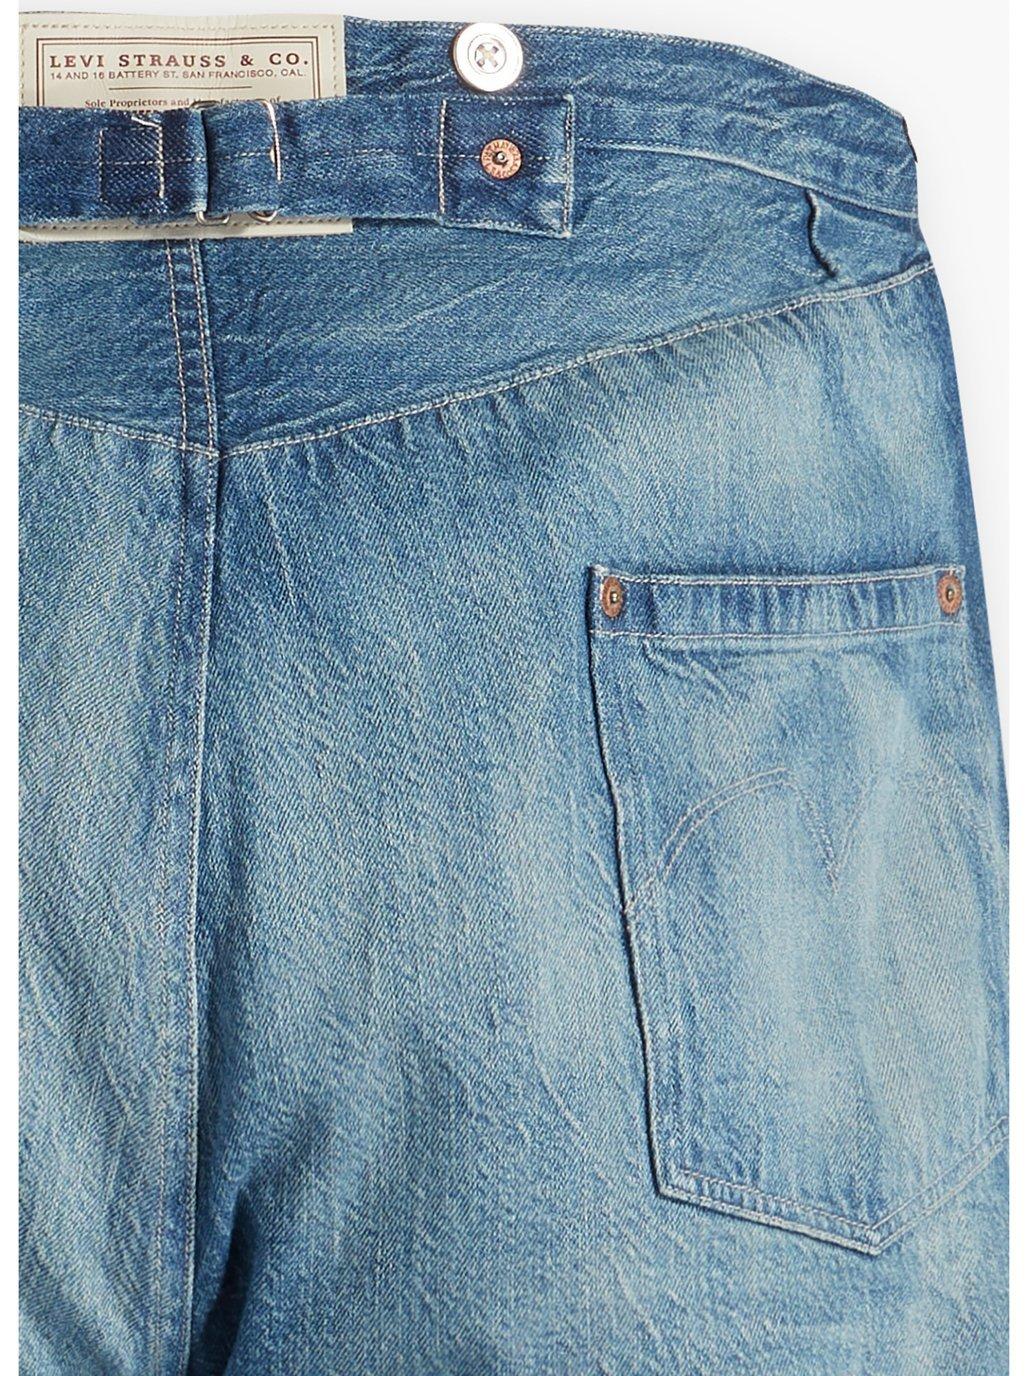 Buy Levi's® Vintage Clothing Men's 1870's Nevada Overall